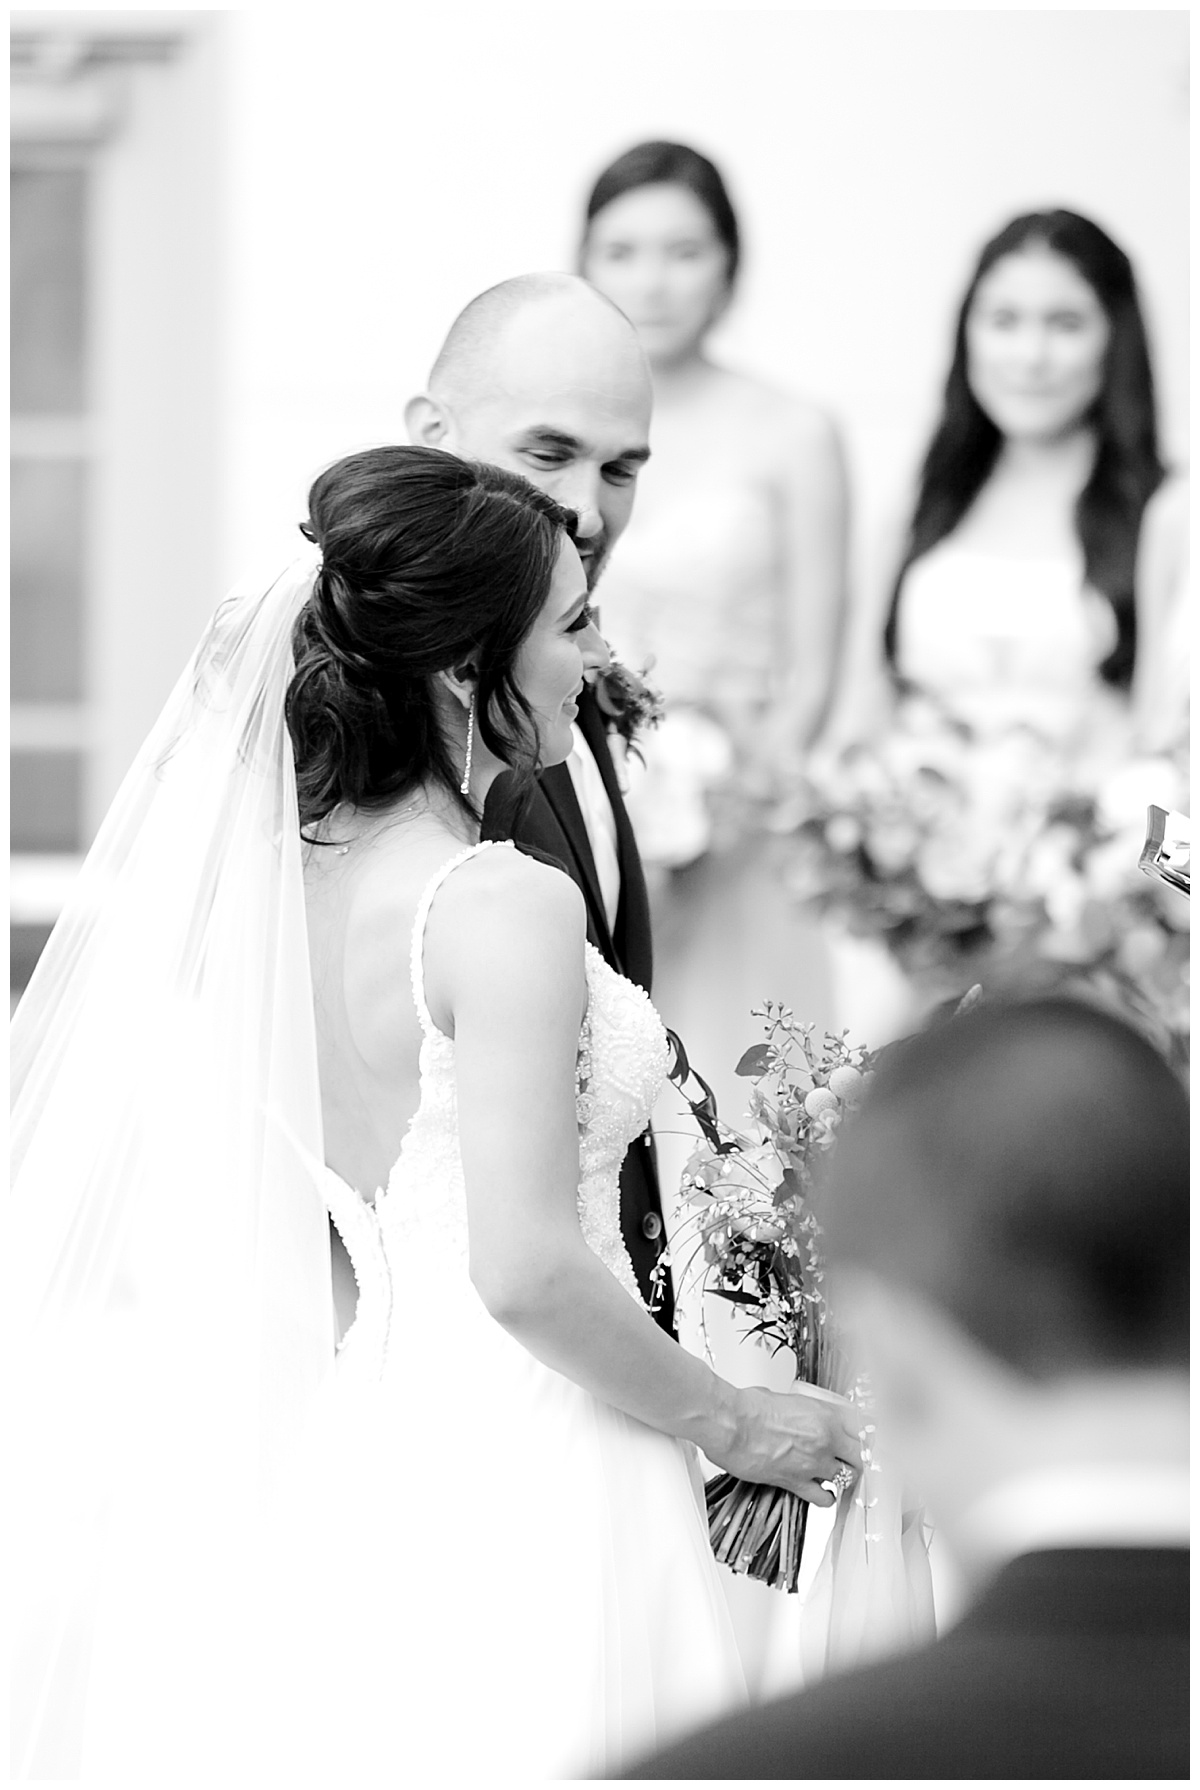 Black and white shot of bride holding hands with groom and smiling at alter at Hyatt Regency Hill Country Resort Wedding in San Antonio, TX | San Antonio Wedding photographer| Destination Wedding Photographer| Monica Roberts Photography | monicaroberts.com